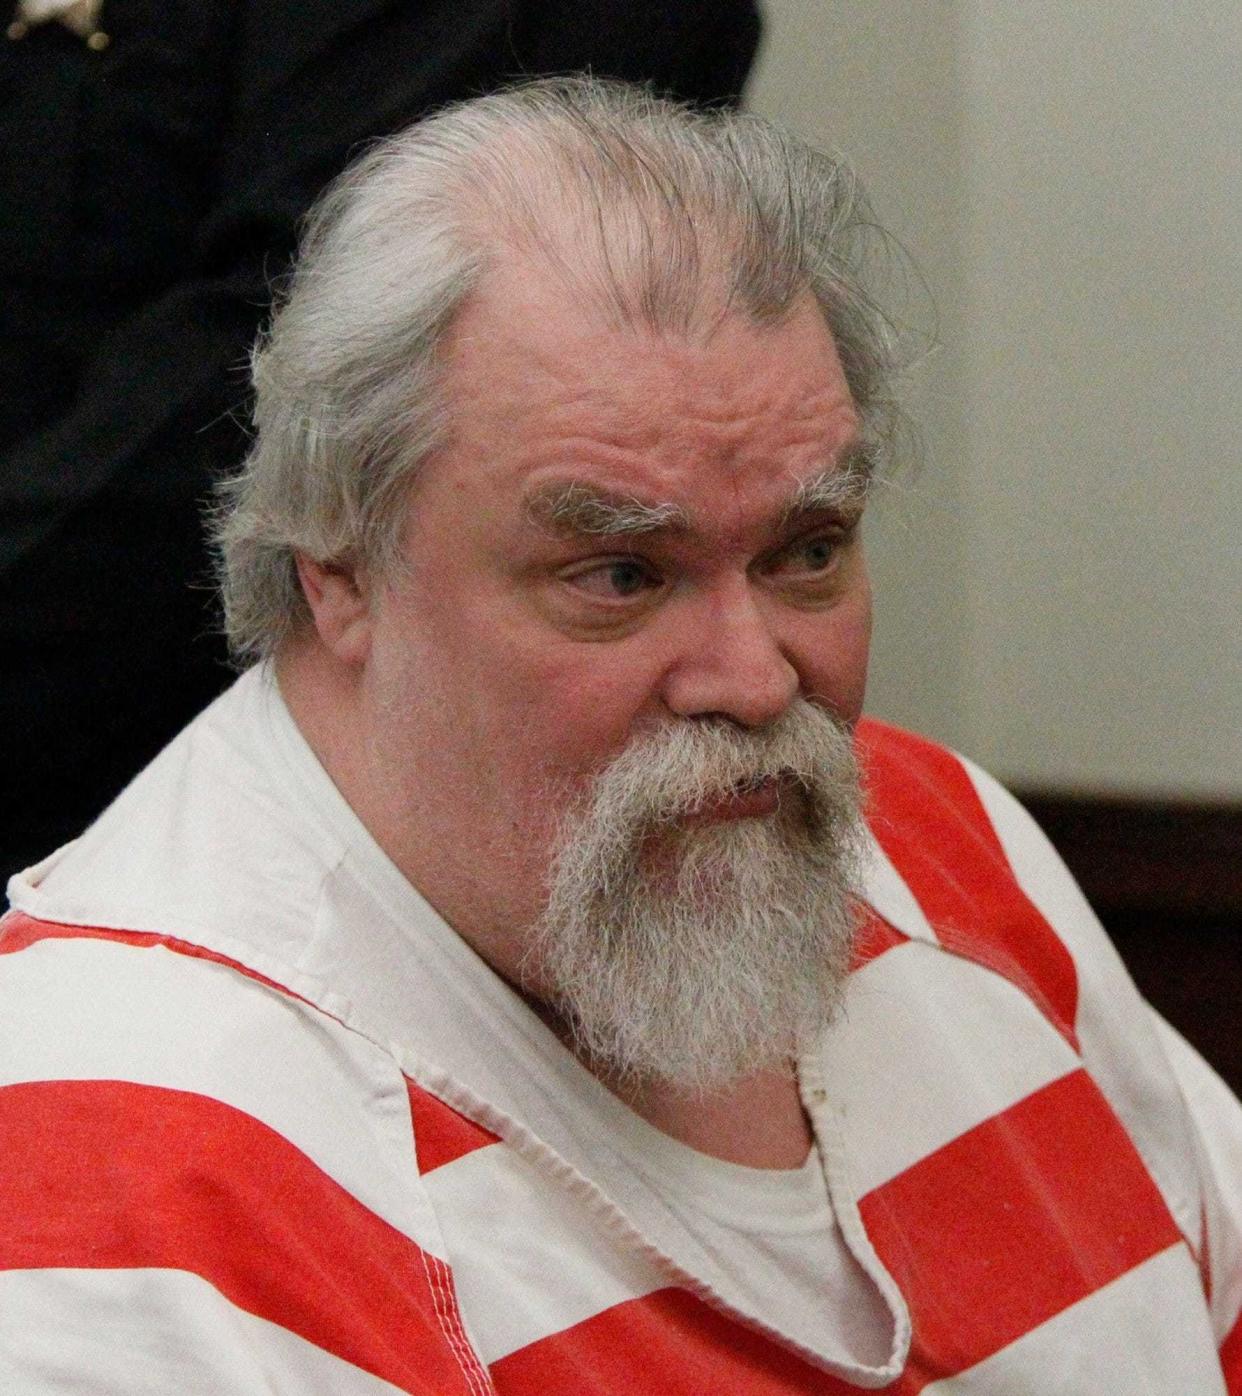 Craigslist killer Richard Beasley addresses the court after the original sentencing in his capital murder case in April 2013. Beasley was given the death sentence on three counts and jail time for other counts.